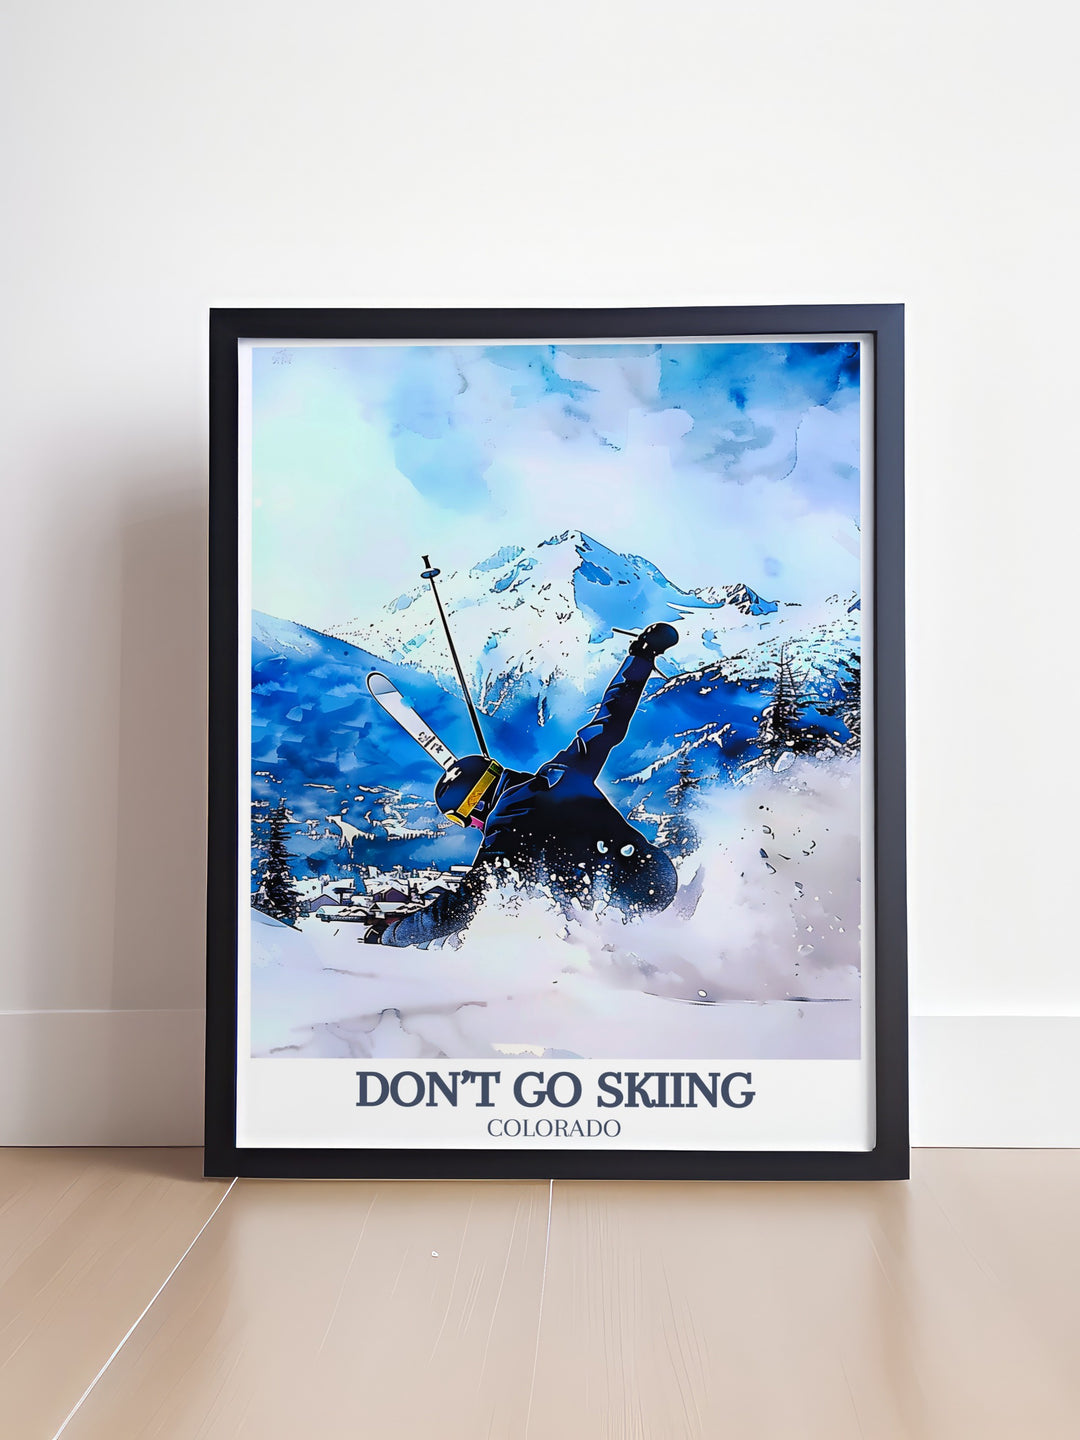 Retro ski poster of Aspen, Colorado, USA highlighting the picturesque ski resort. This beautiful print makes a fantastic gift for skiers and snowboarders, adding a nostalgic touch to any room. Perfect for those who love vintage aesthetics and winter adventures.